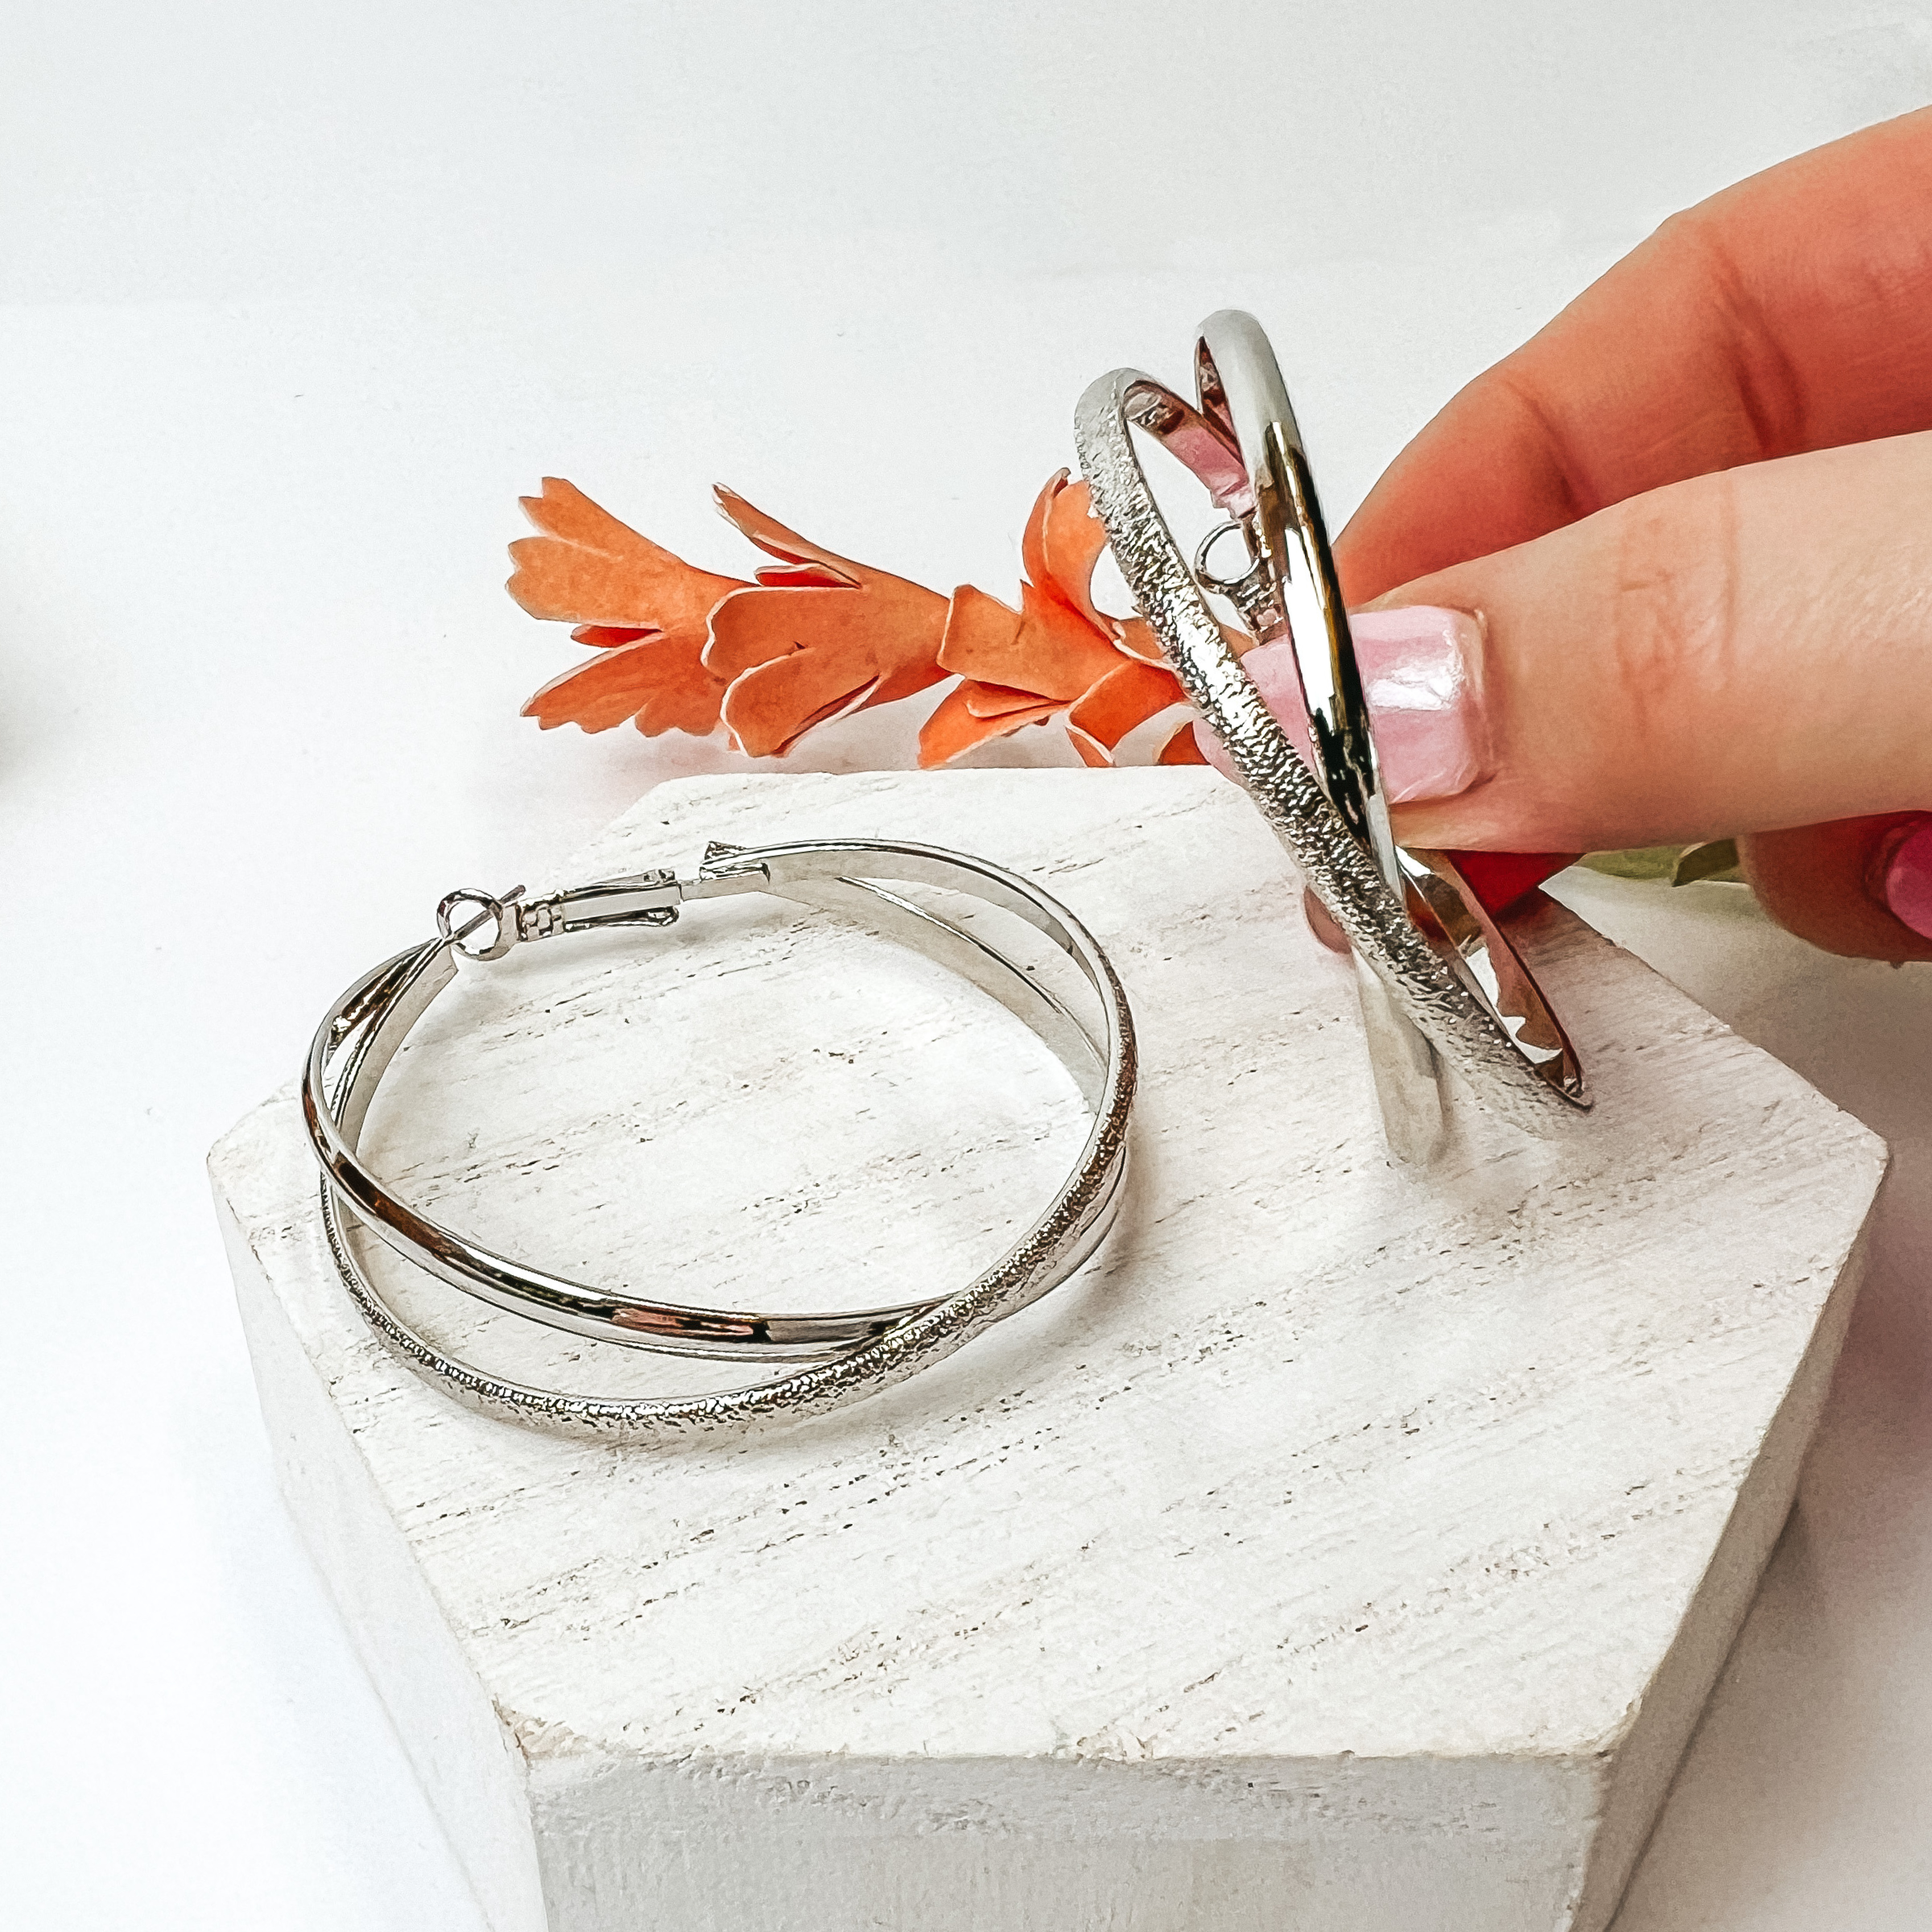 Double hoop earrings in silver. One hoop is silver and the other one is a texturized silver. One hoop is pictured on a white block while the other one is being held by a hand all on a white background. 